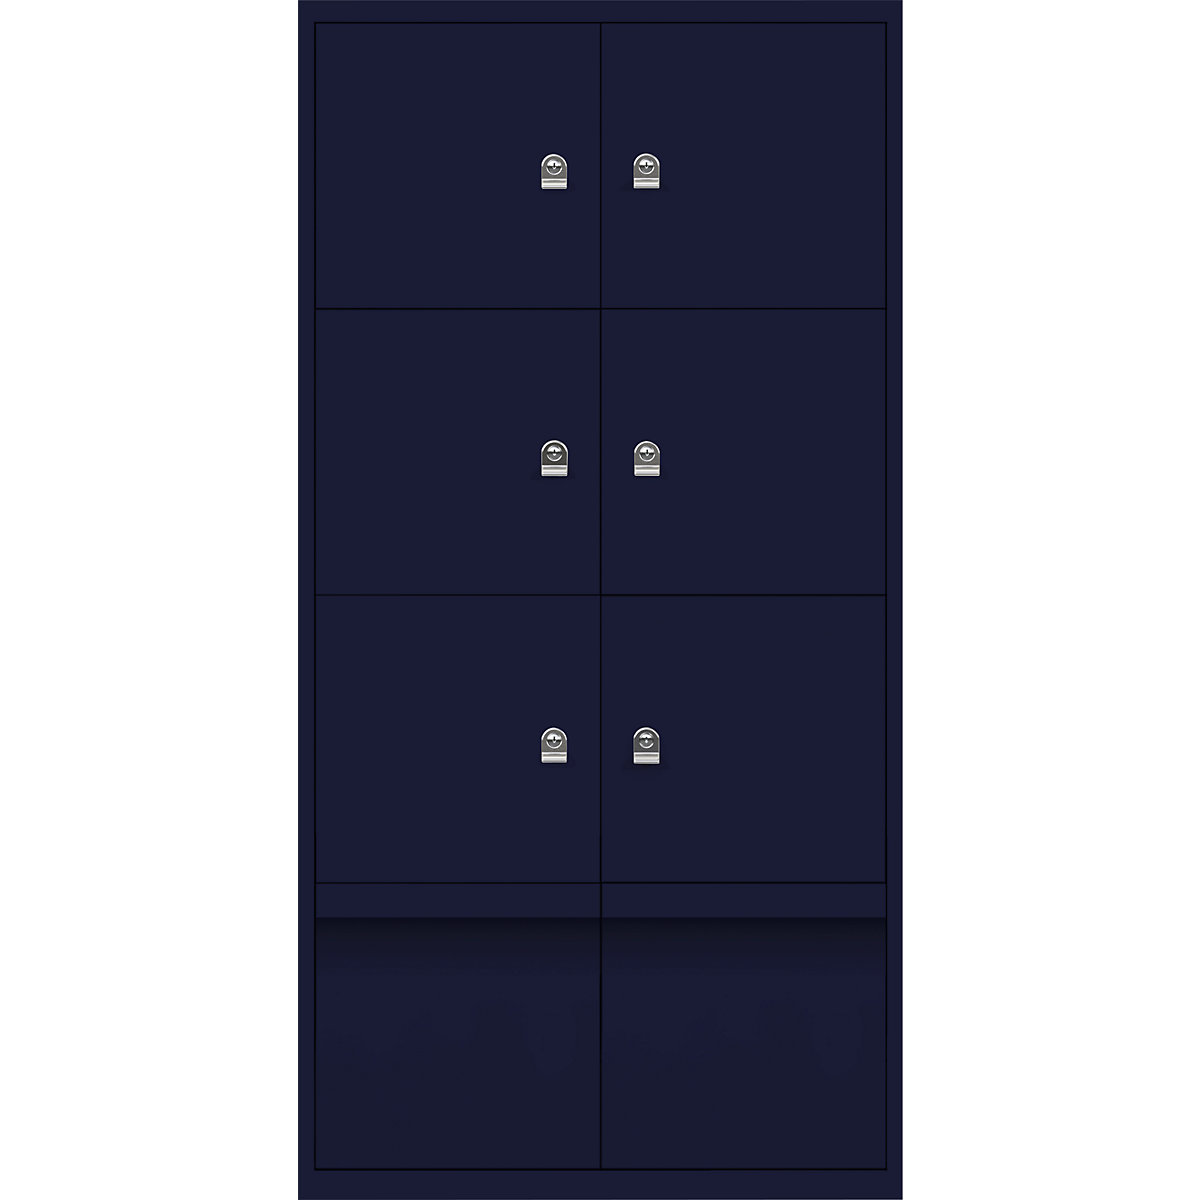 BISLEY – LateralFile™ lodge, with 6 lockable compartments and 2 drawers, height 375 mm each, oxford blue